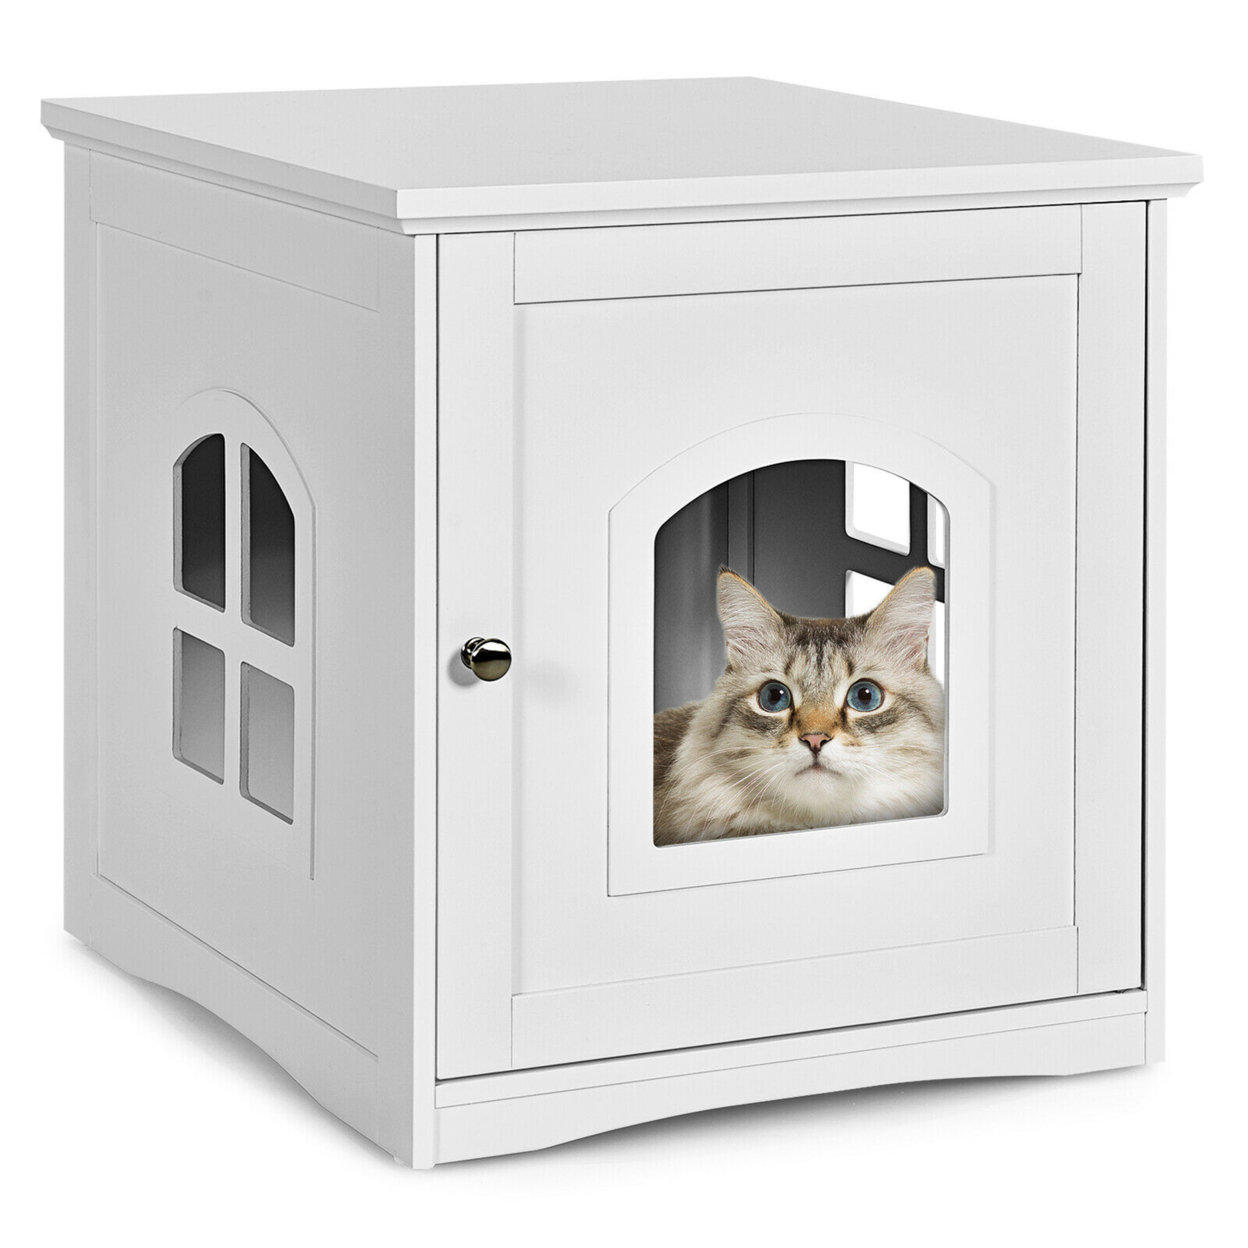 Cat House Side Table Nightstand Pet Home Litter Box Enclosure - White